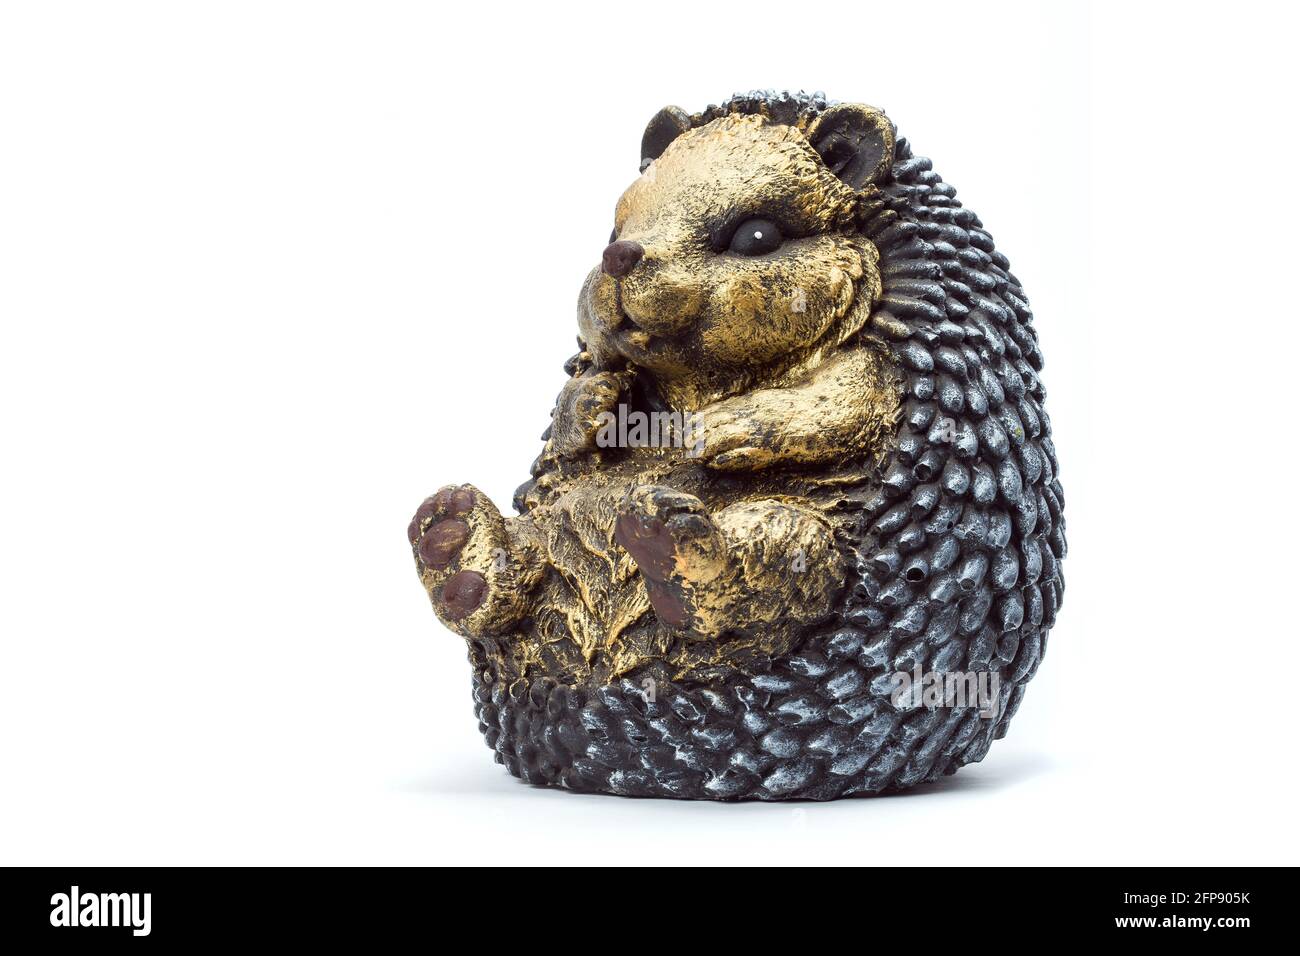 concrete garden sculpture for landscaping and backyard decoration, isolated hedgehog on a white background, nobody. Stock Photo